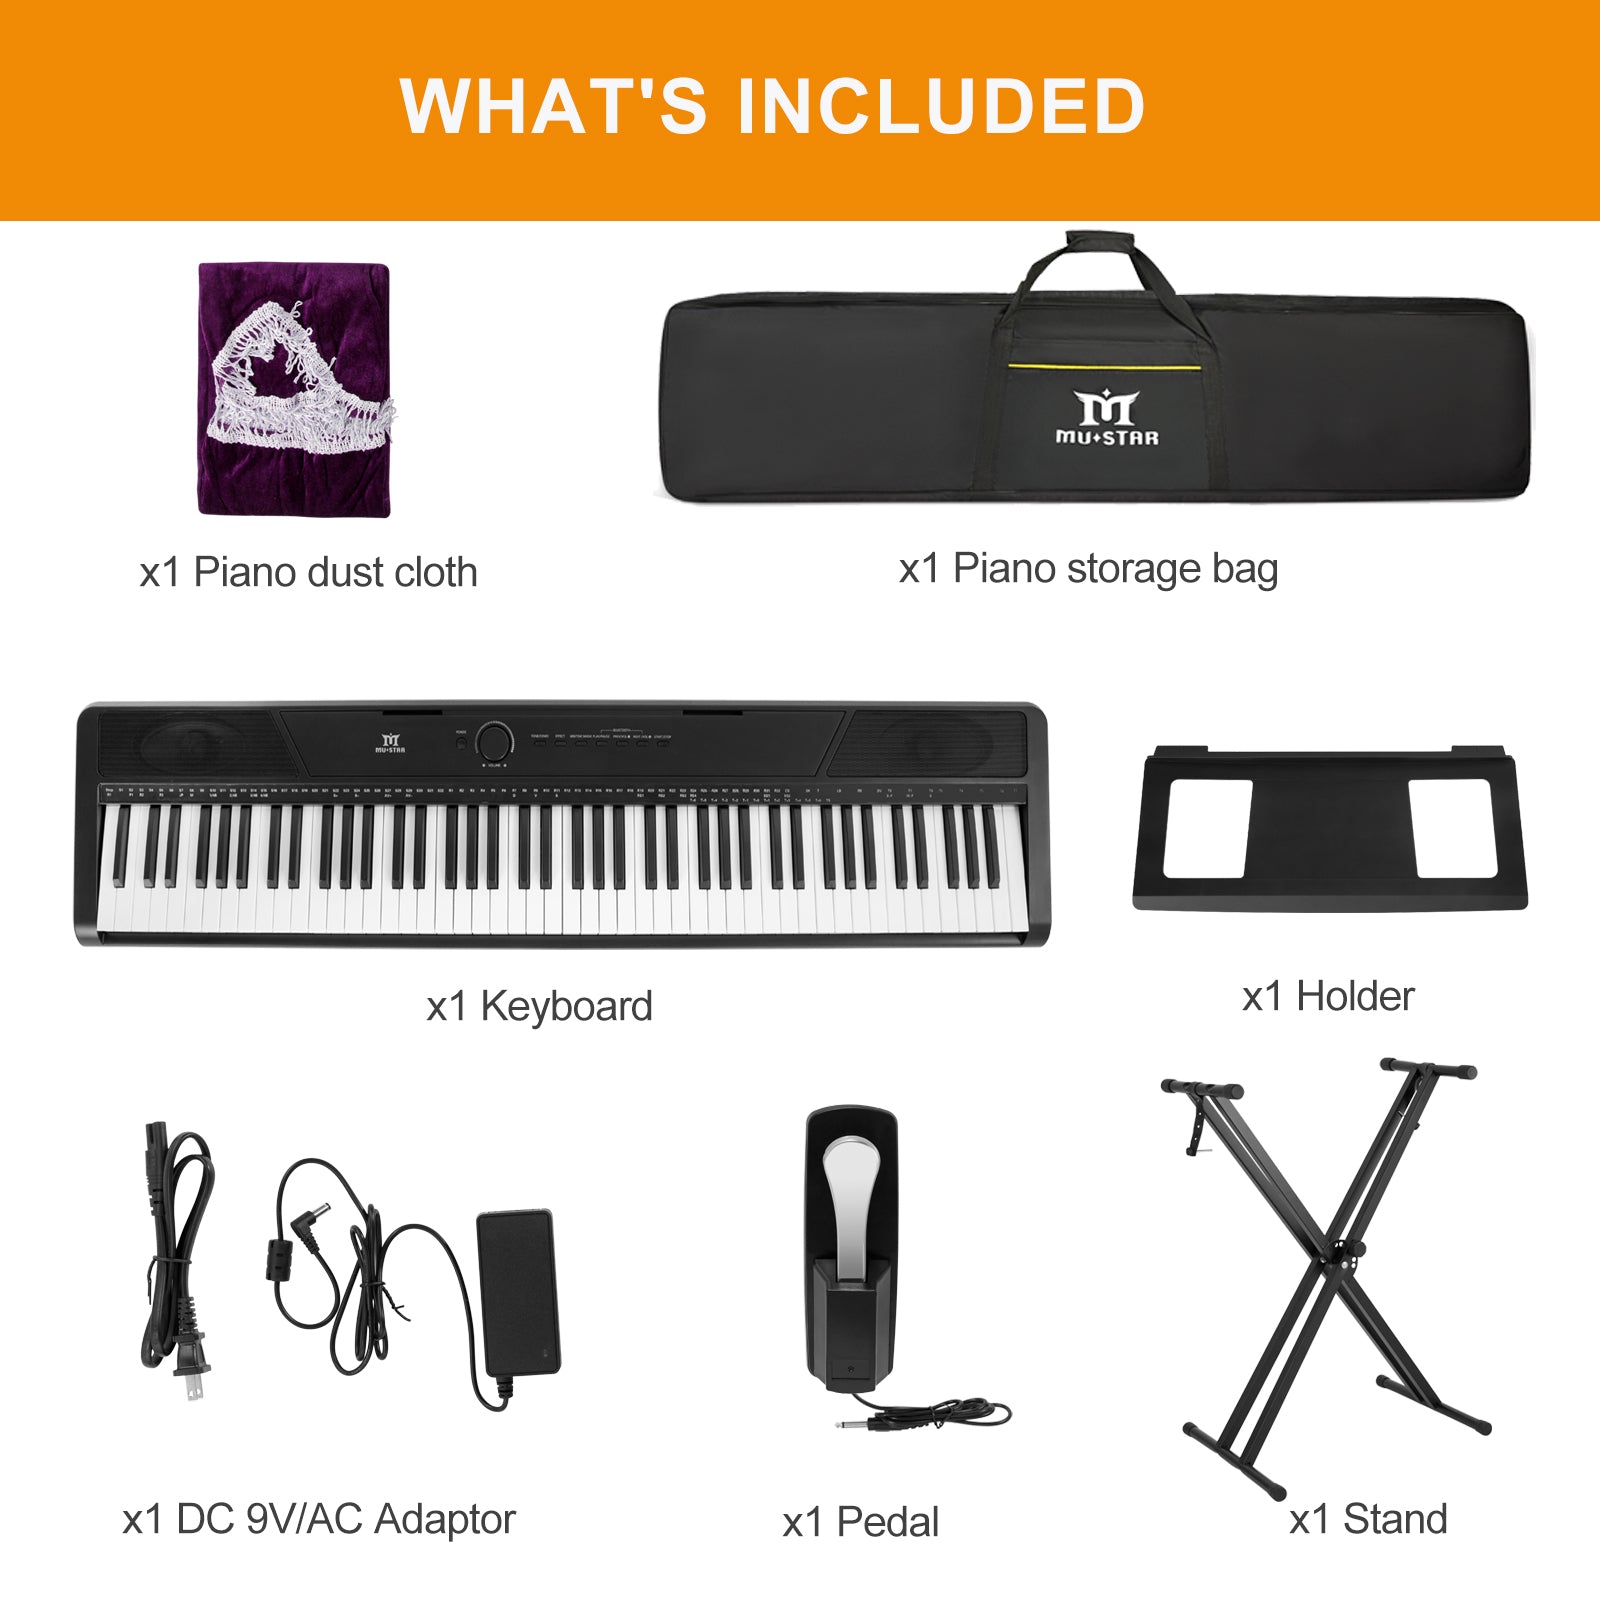 MUSTAR MEP-1100, 88 keys Digital Piano, Semi Weighted Keyboard Piano, Electronic Keyboards for Beginners, Sustain Pedal, USB/MIDI/Bluetooth, ABS, 128 Rhythms, 2 built-in 25W Stereo Speakers, Black